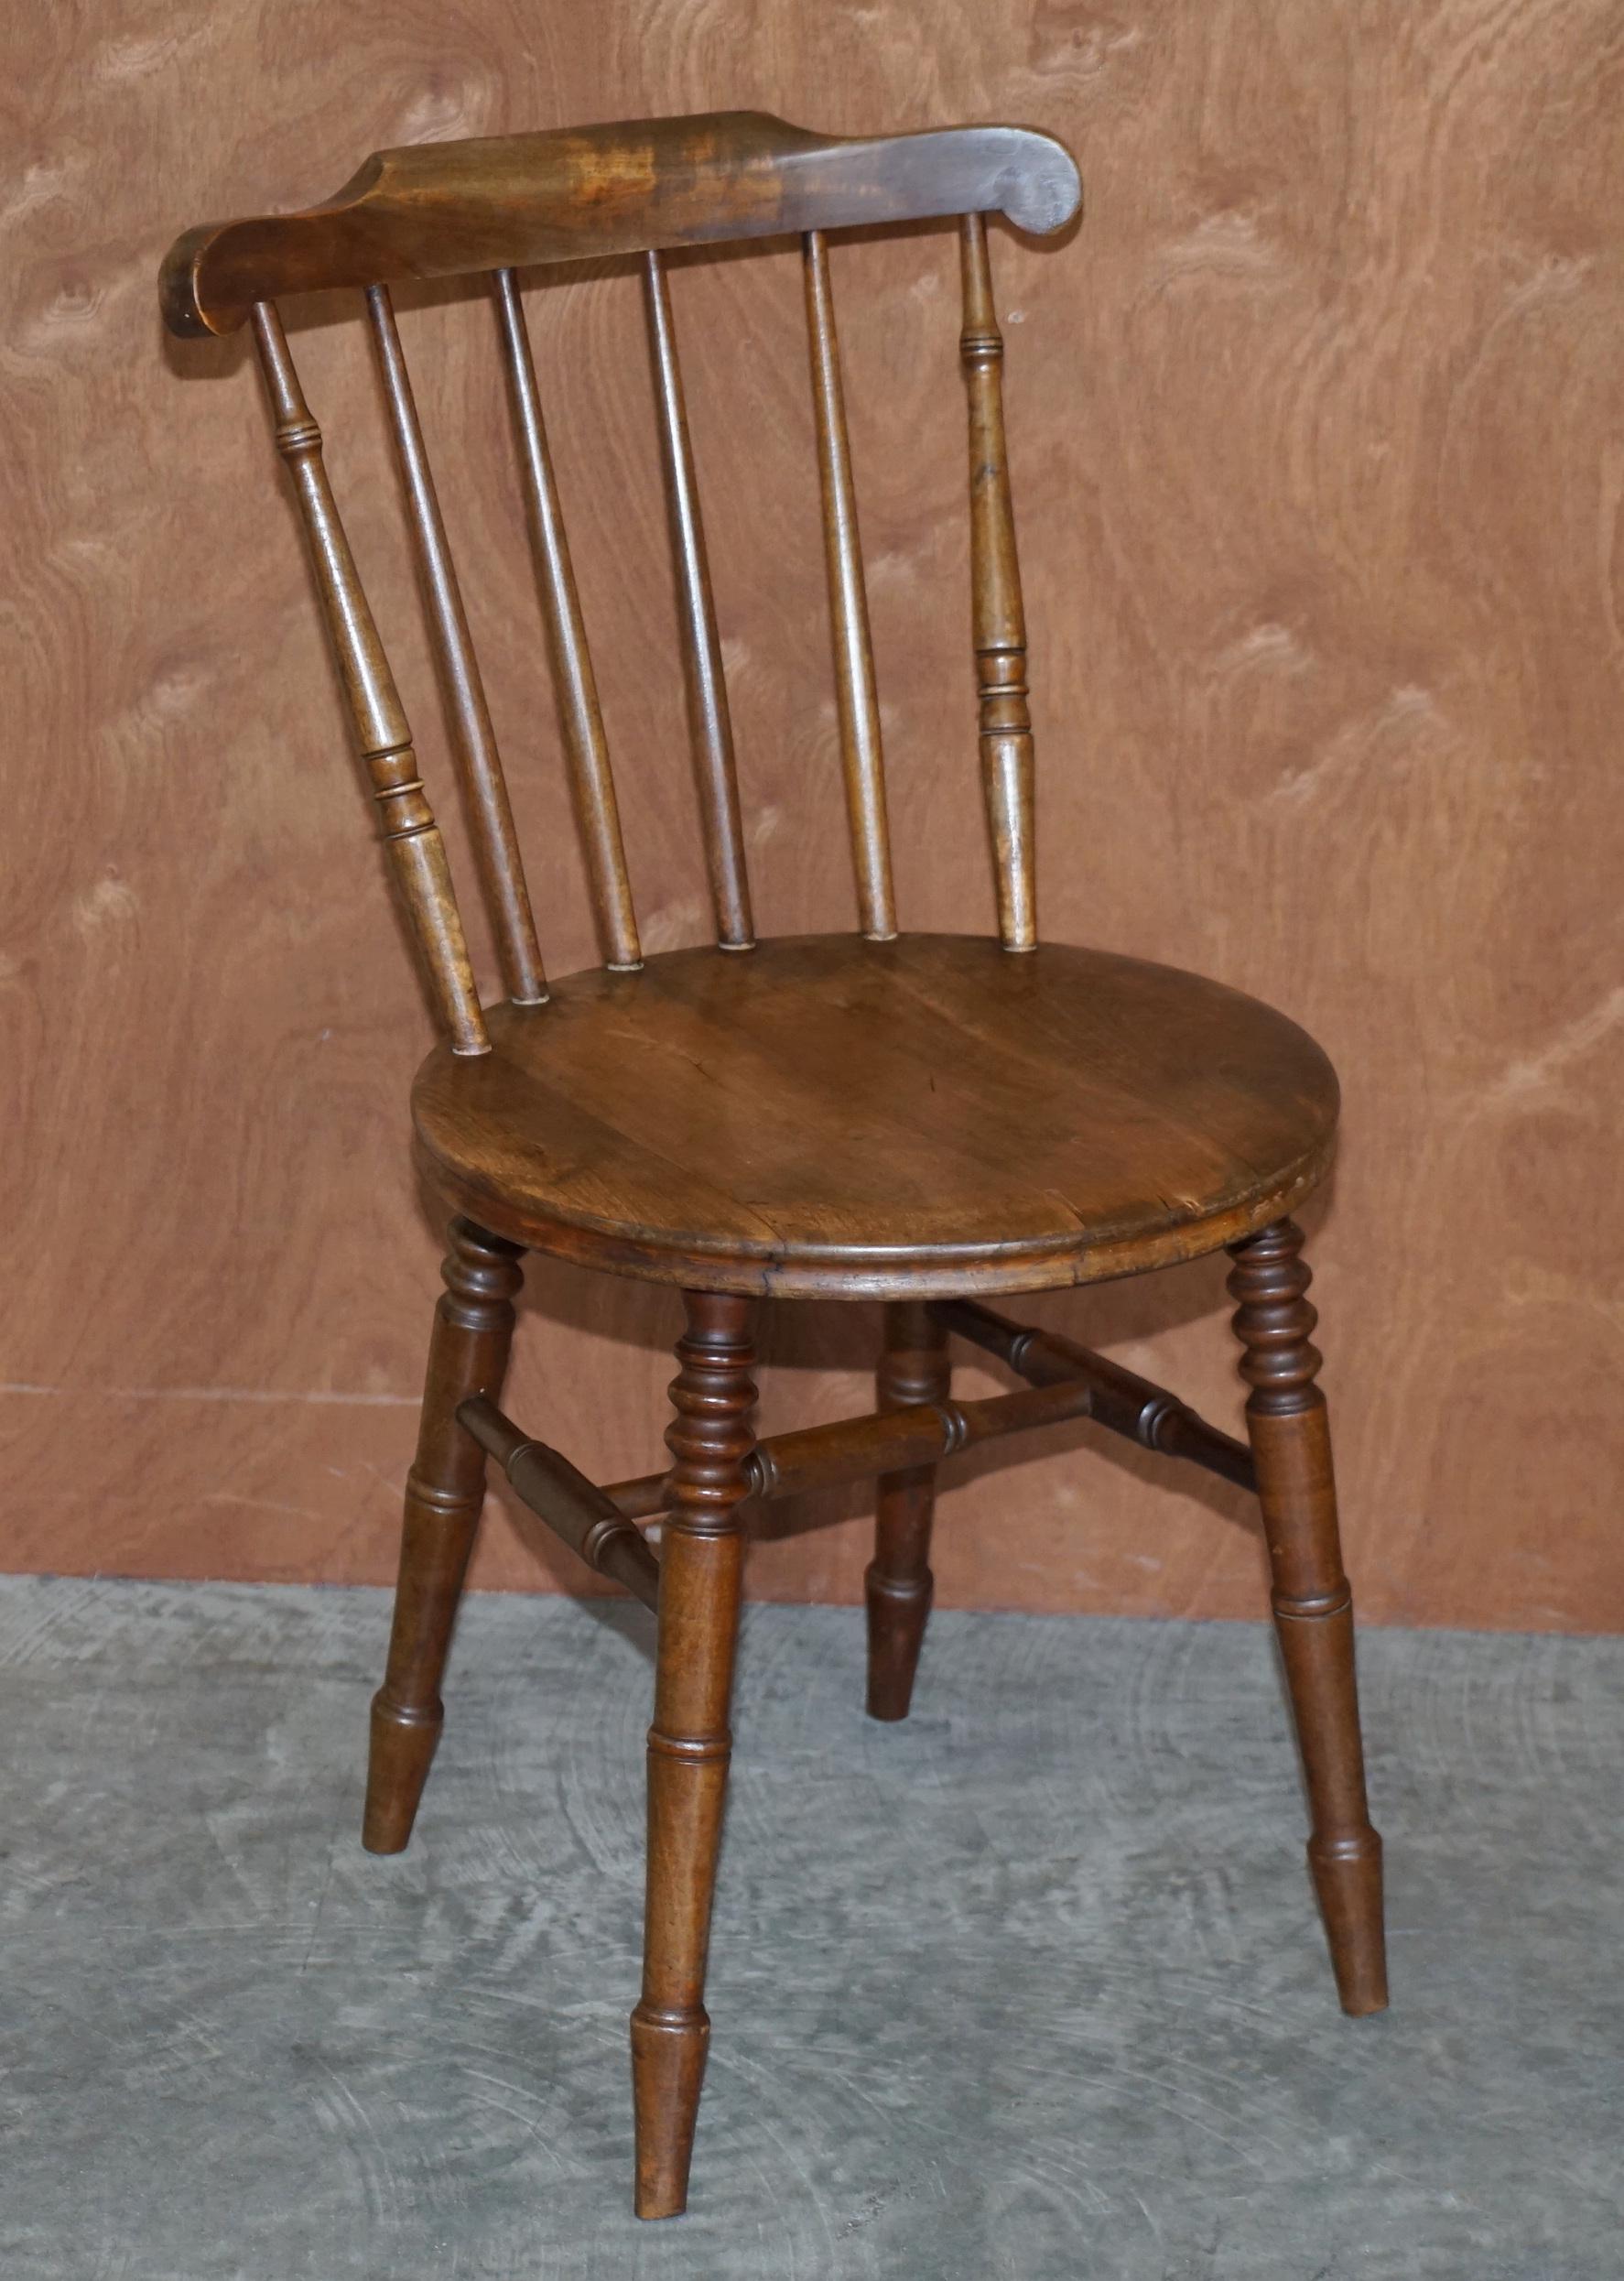 We are delighted to offer for sale this stunning pair of Edwardian Ibex Penny Windsor chairs in walnut 

A good looking well made and decorative pair, these chairs are both stamped to the base made in Sweden, they are quite a well known and